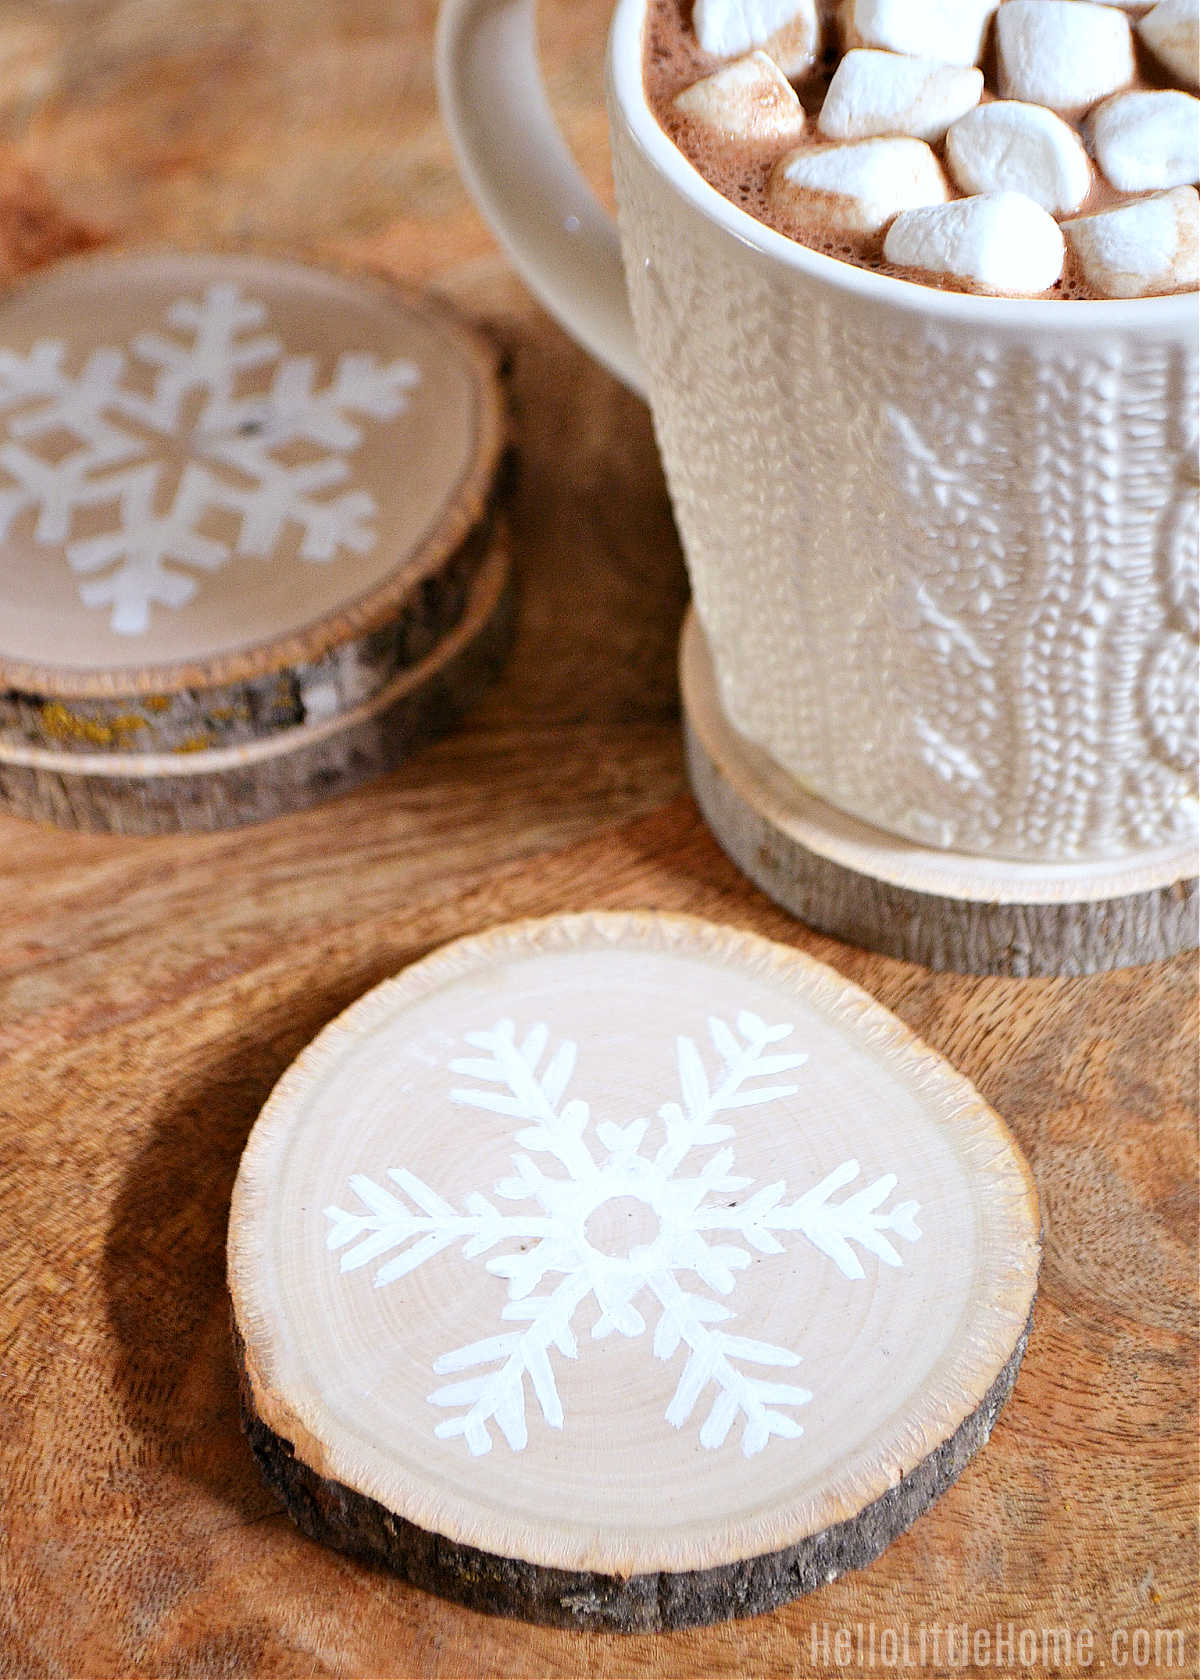 The finished coasters on a wood table next to a mug of hot chocolate.